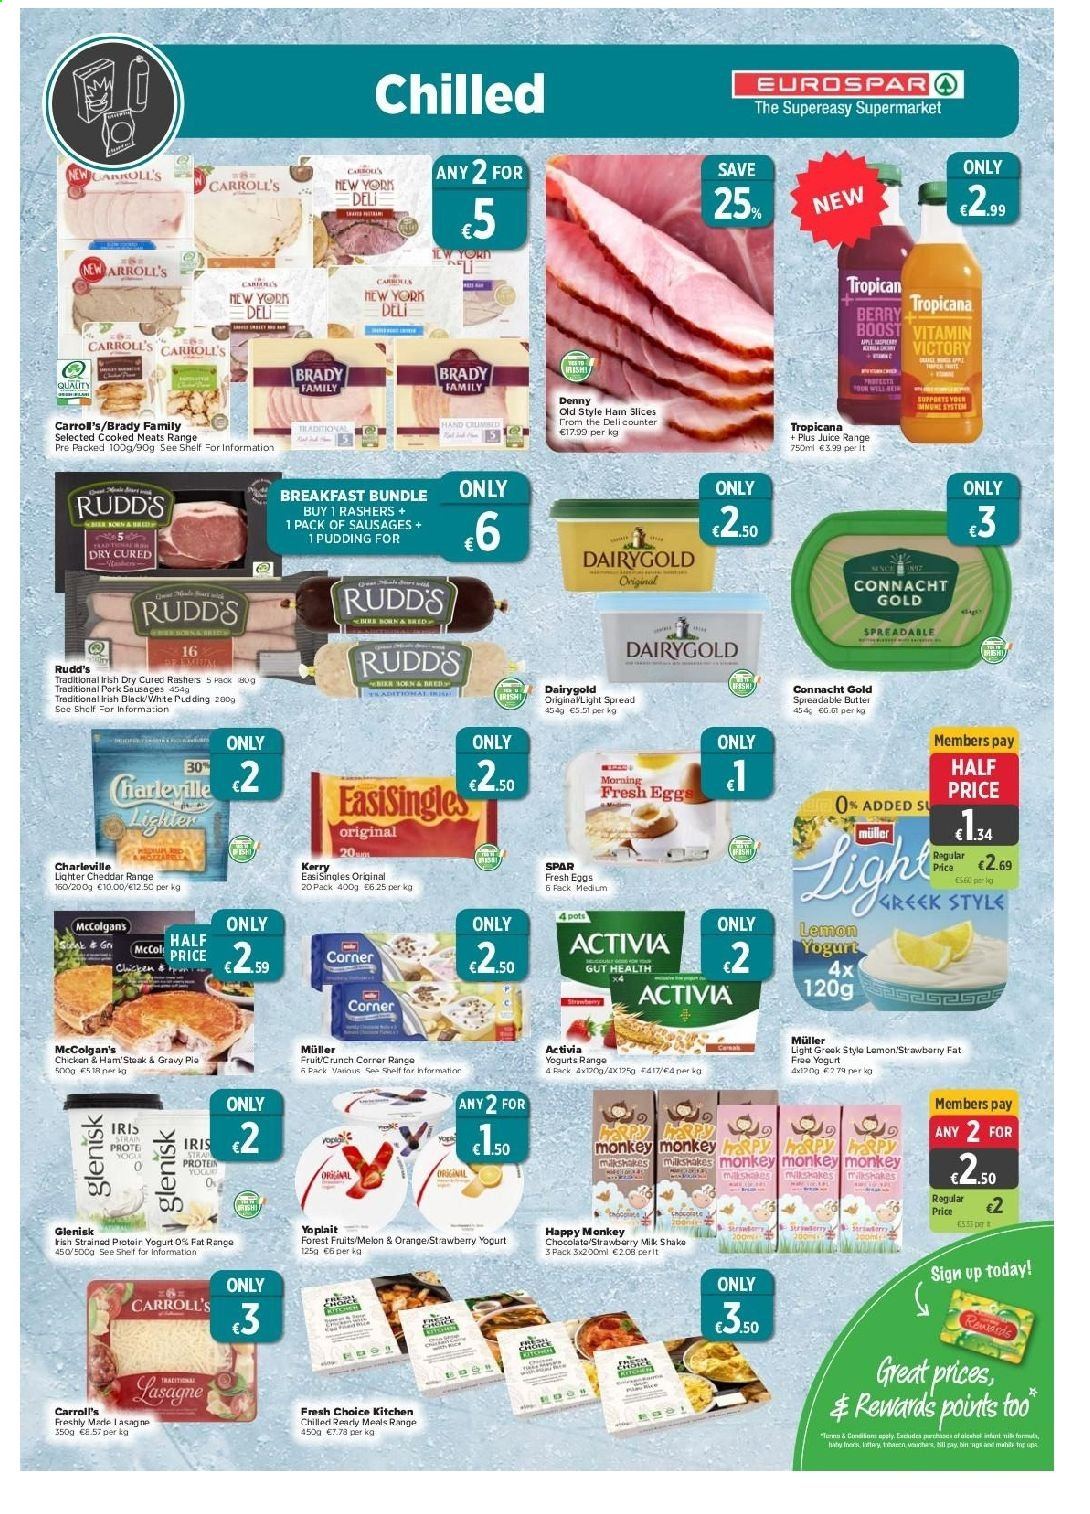 EUROSPAR offer  - 29.7.2021 - 18.8.2021 - Sales products - fish, Fresh Choice Kitchen, ham, rashers, sausage, cheddar, cheese, pudding, yoghurt, Müller, Activia, shakes, eggs, chocolate, juice, Boost. Page 5.